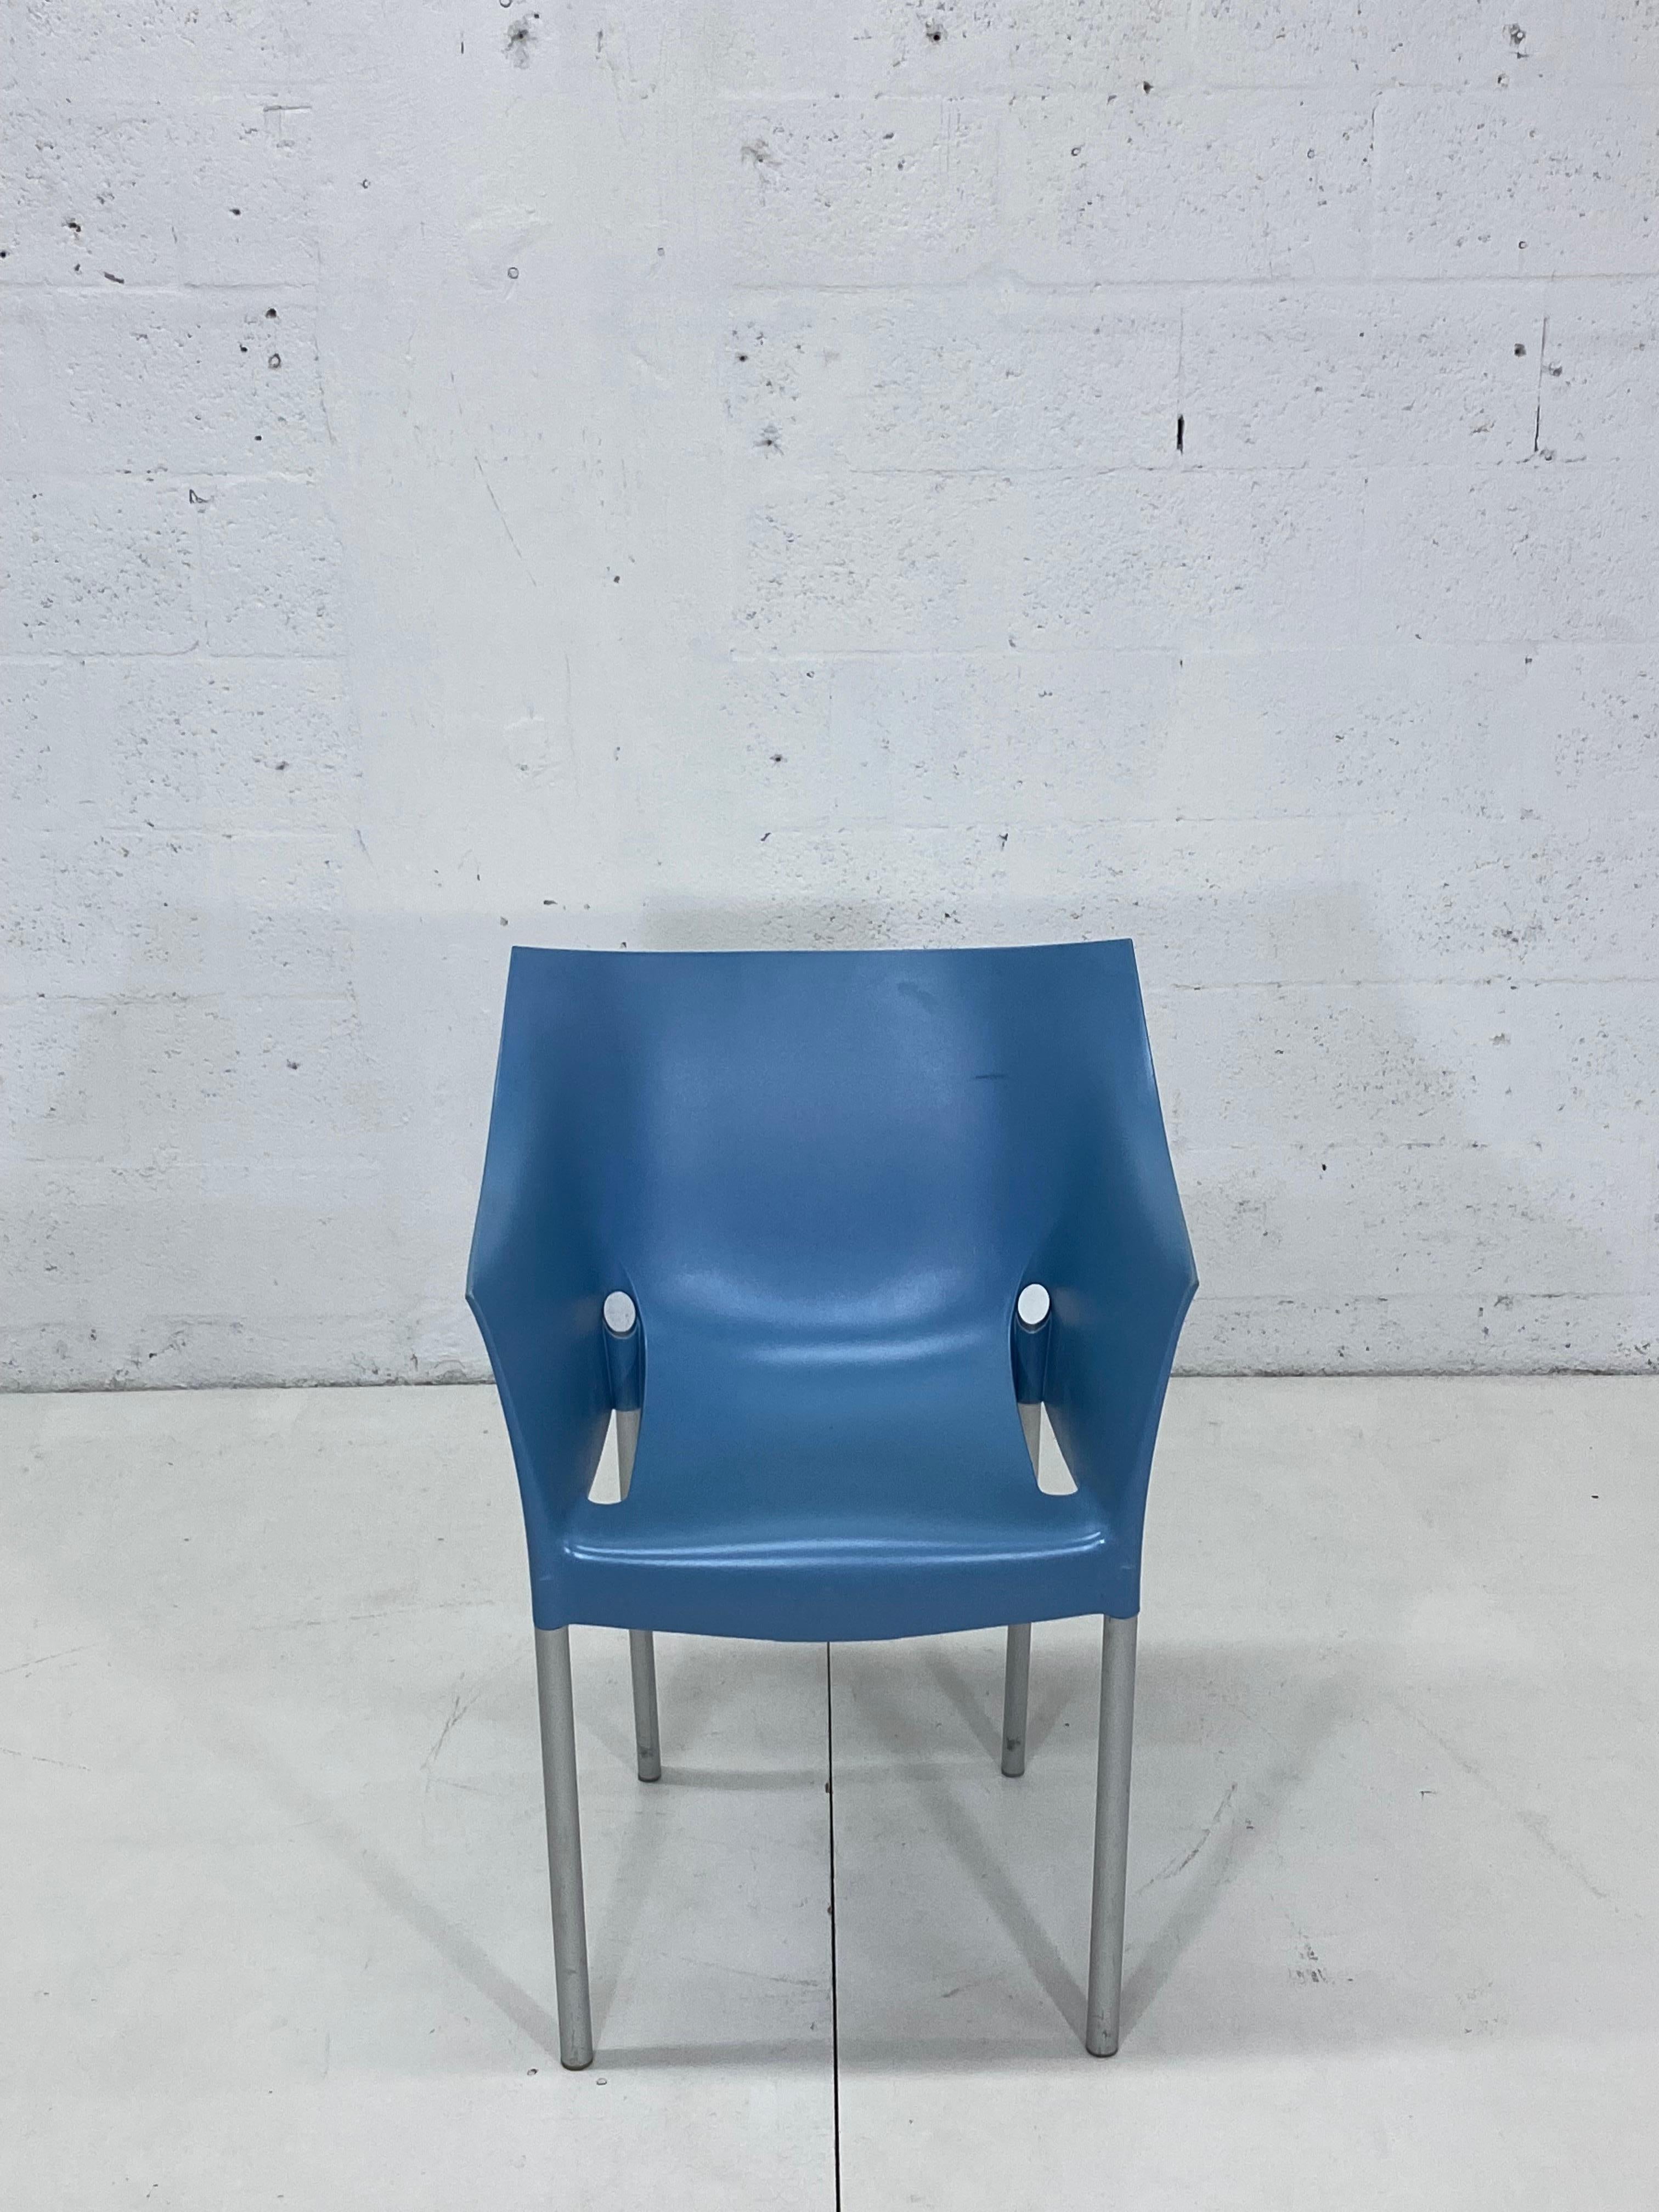 Set of ten Blue Dr. No chairs with aluminum legs by Philippe Starck and produced by Kartell, Italy.